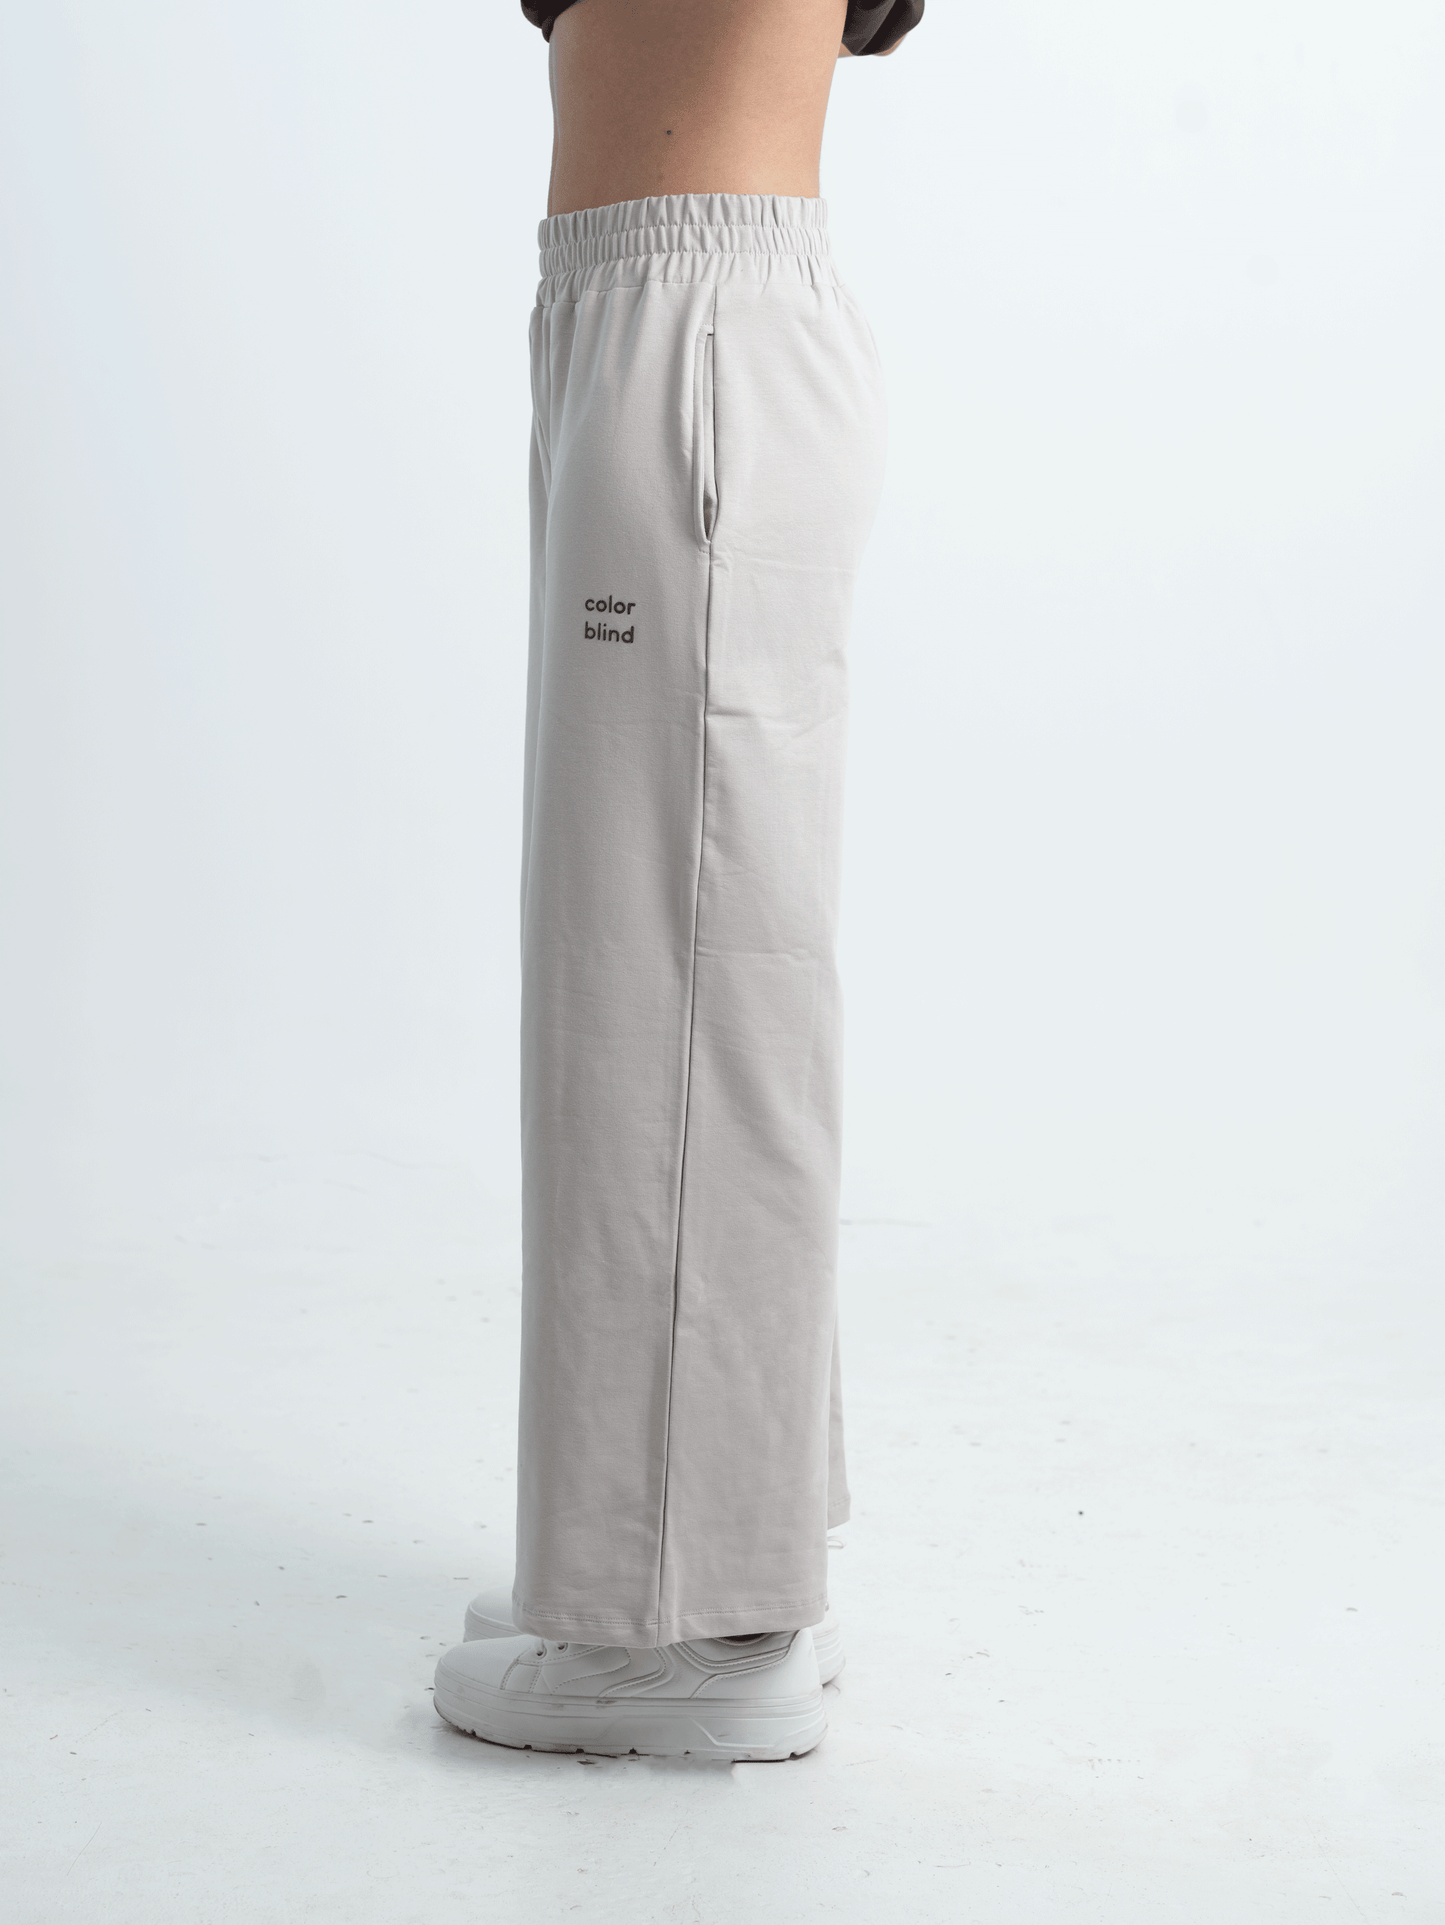 STONE GREY WOMEN'S RELAXED FIT PANTS